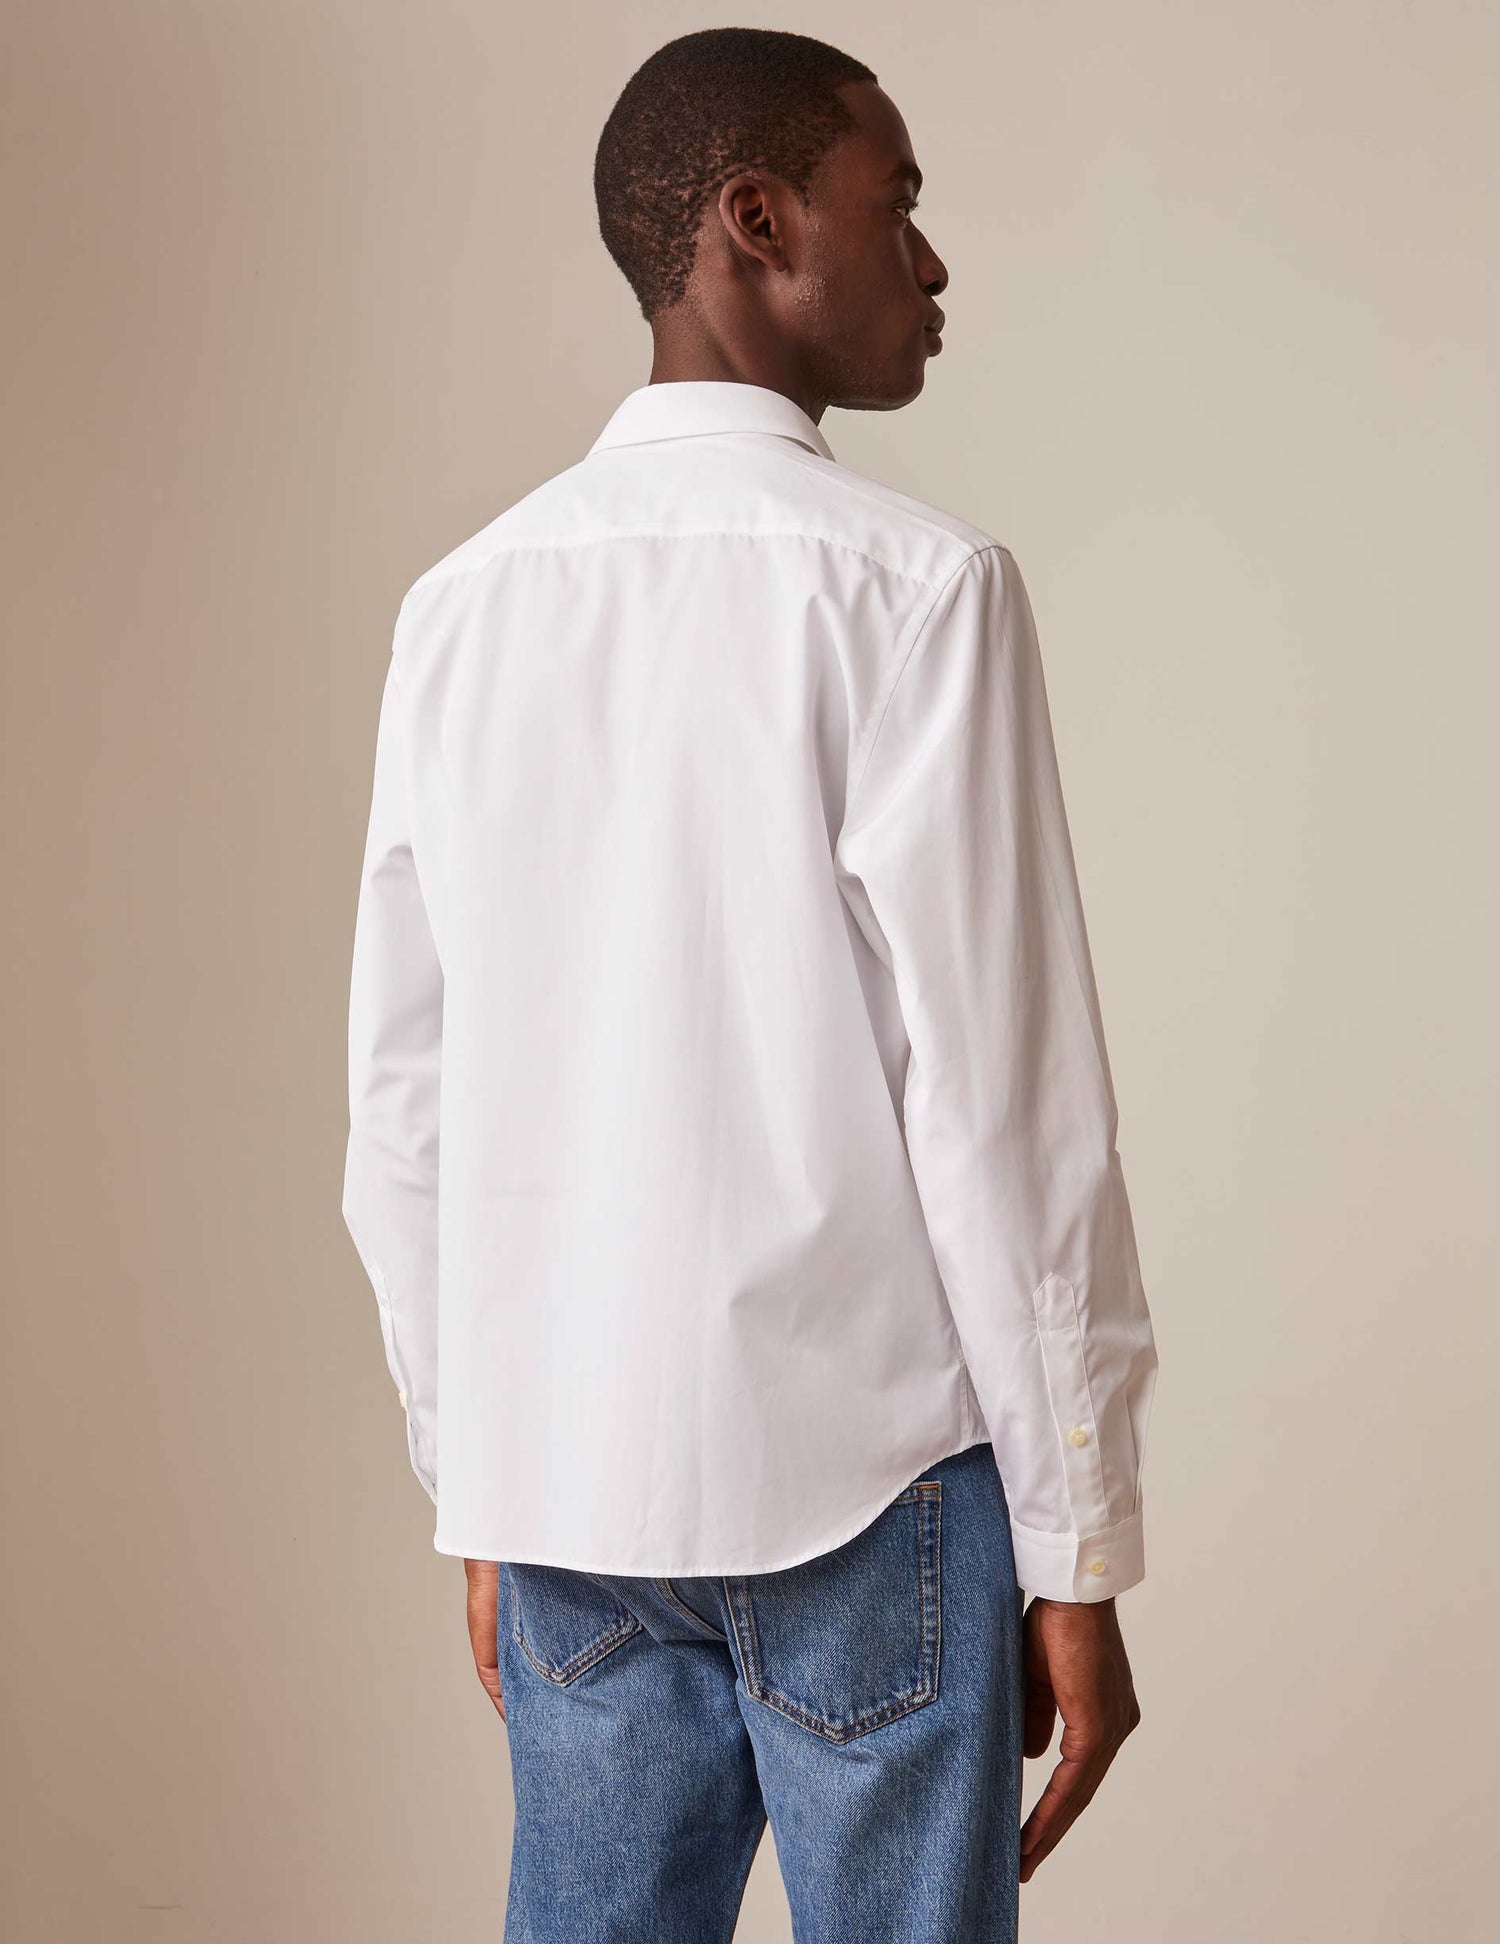 White "Je t'aime" shirt with grey embroidery - Poplin - Figaret Collar#7